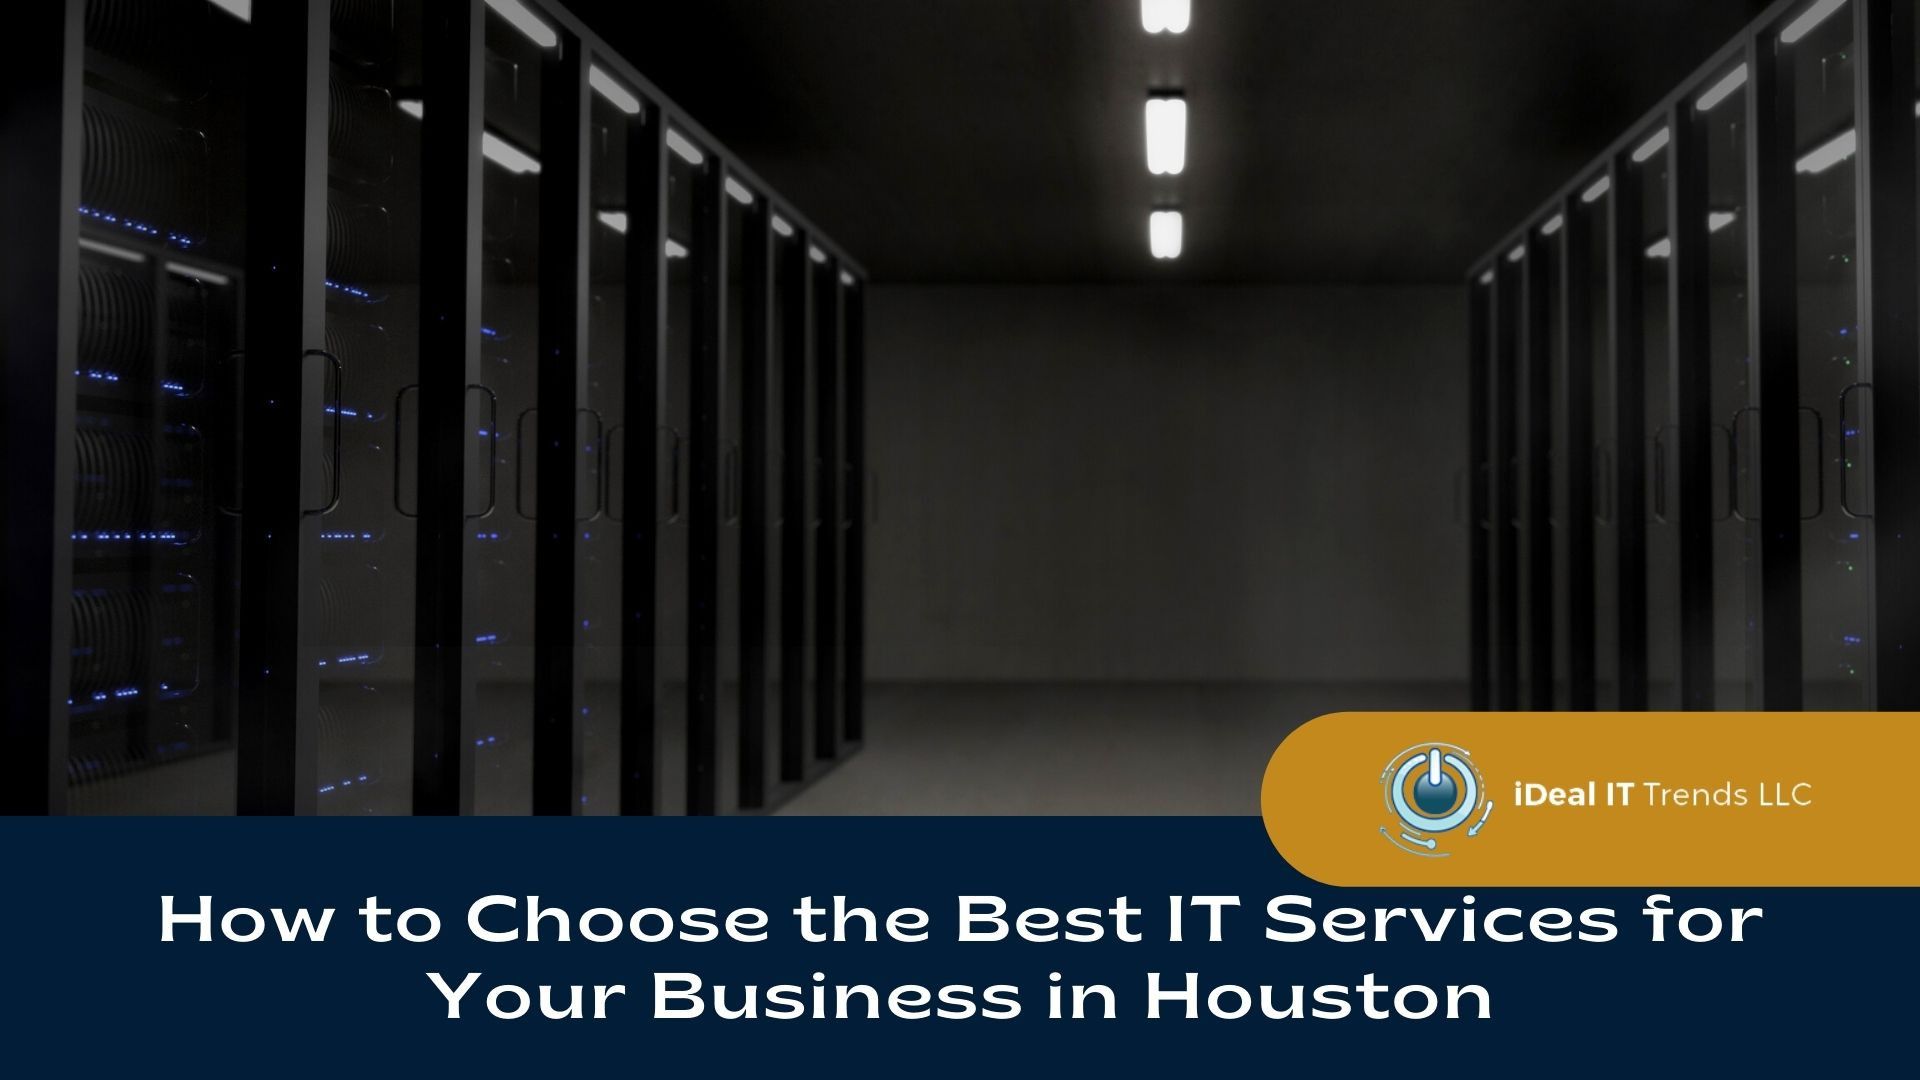 How to Choose and Hire the Best IT Services for Your Business in Houston